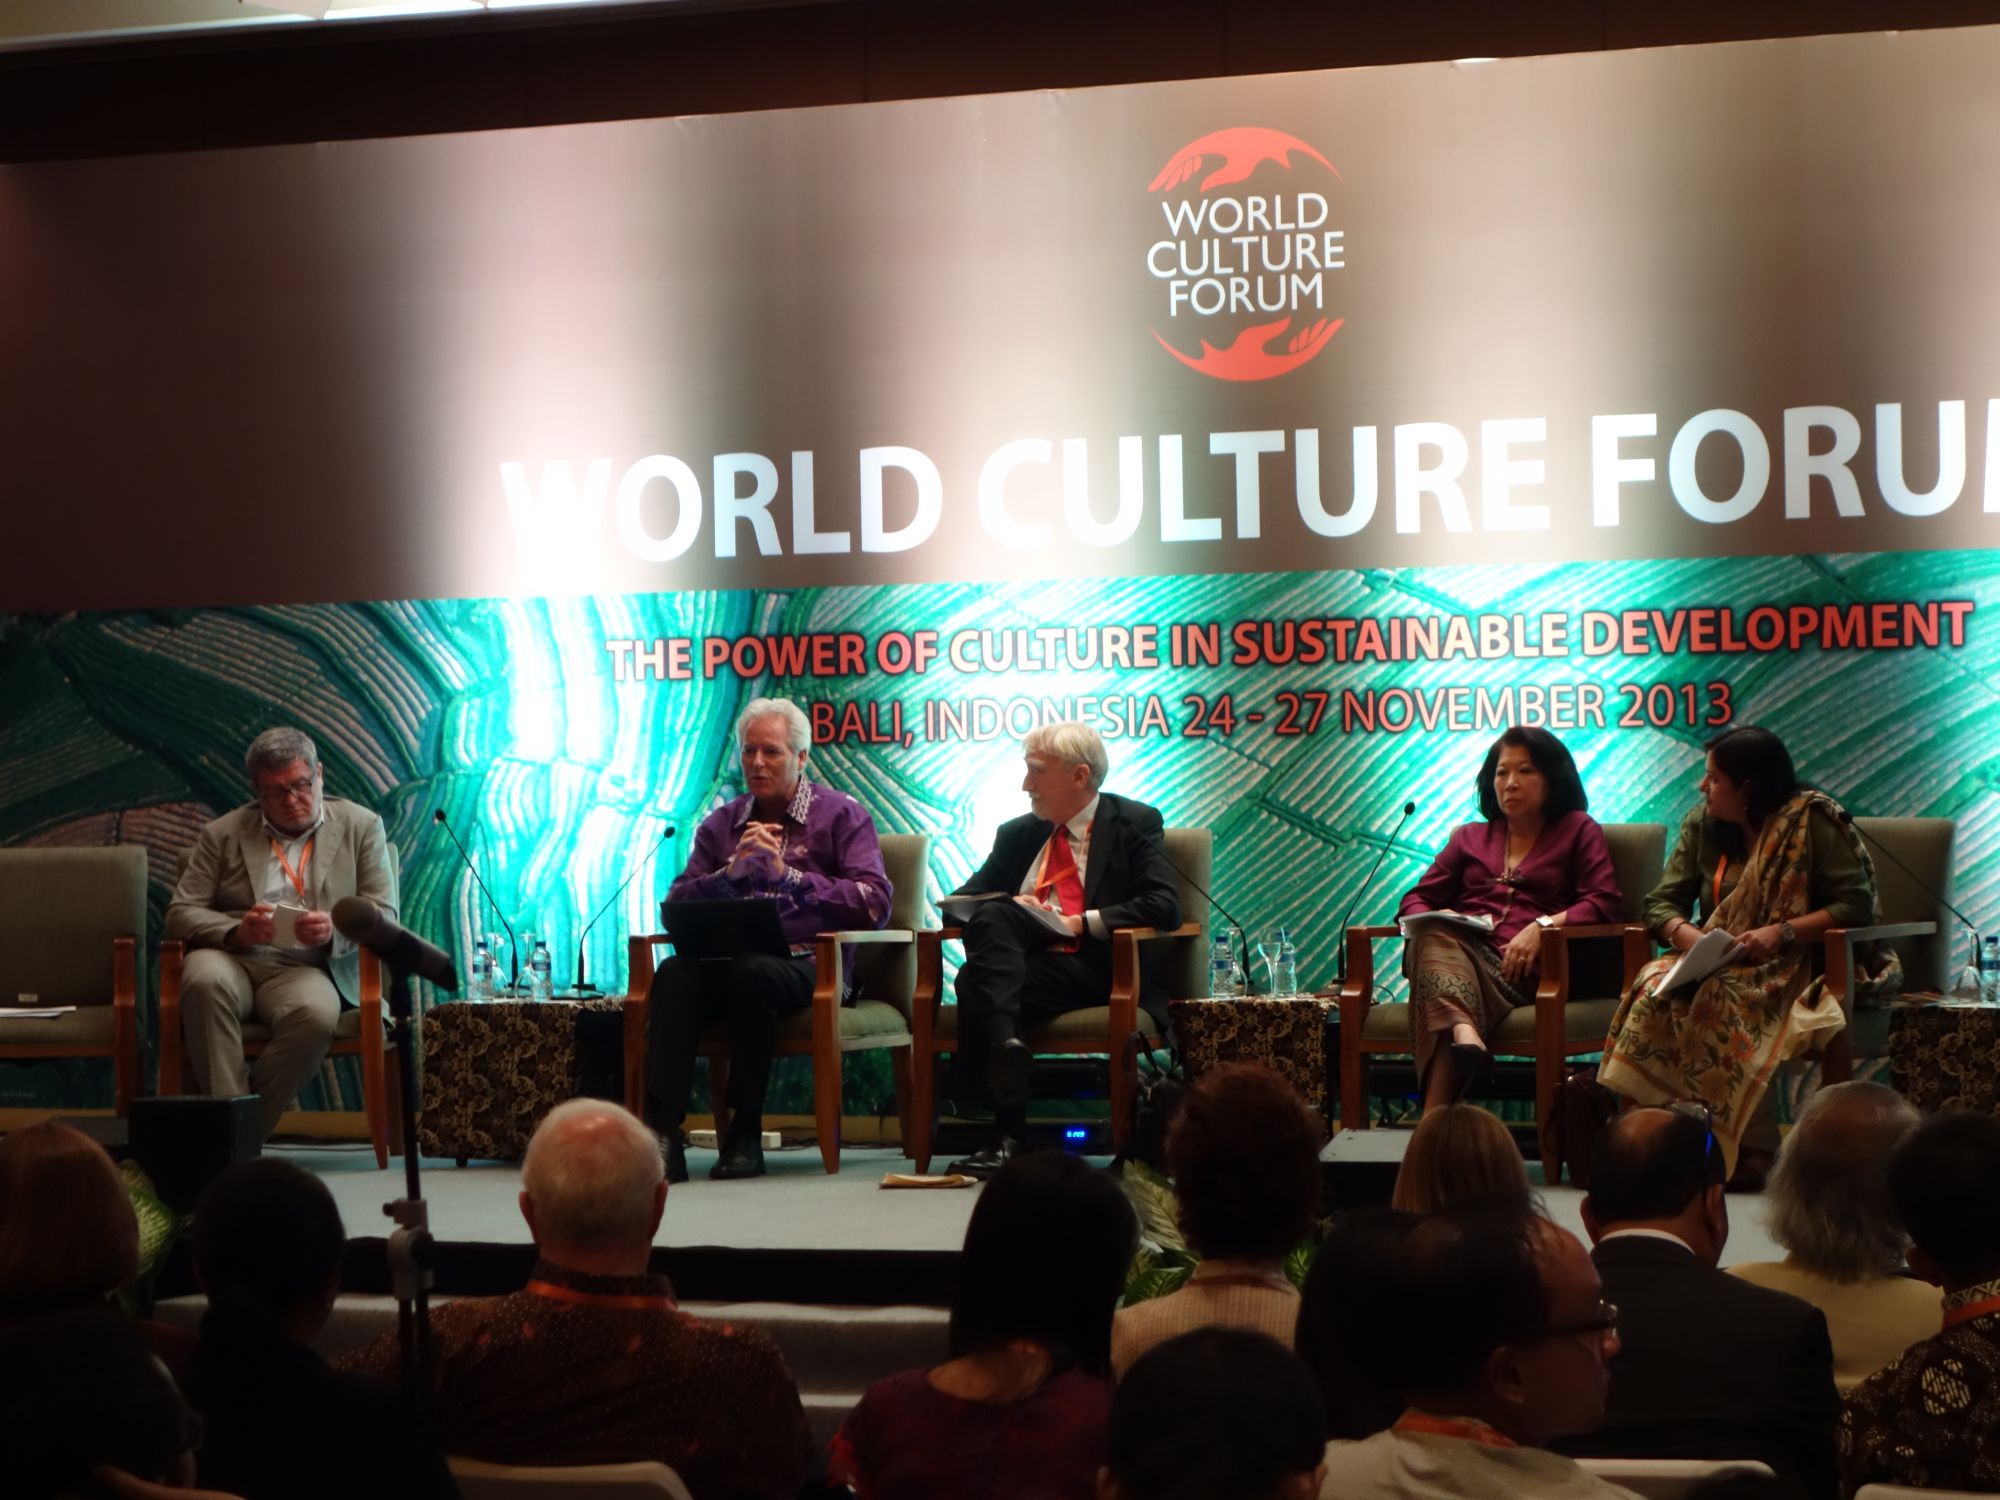 The Indonesian Government holds the World Culture Forum under the patronage of UNESCO, Bali, 23-27 November, 2013